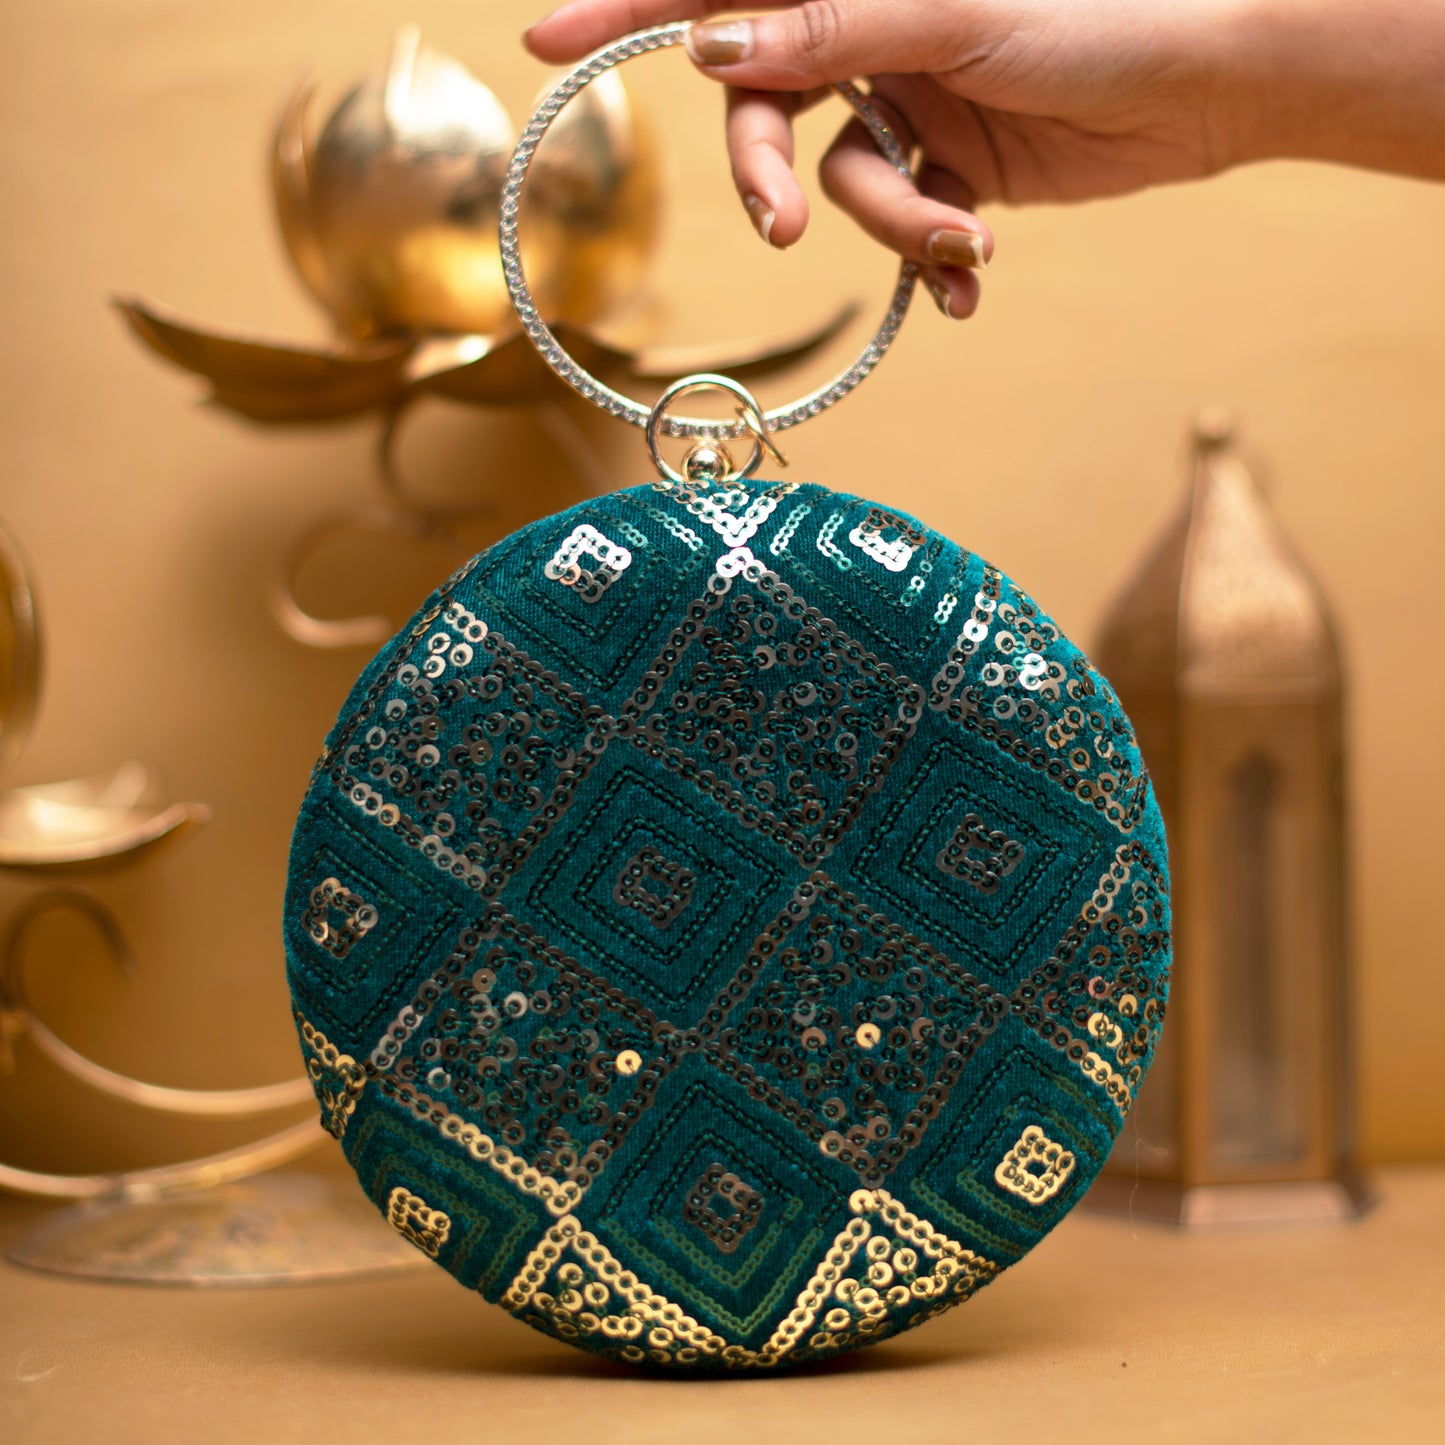 Sea Green Embroidery Round Clutch